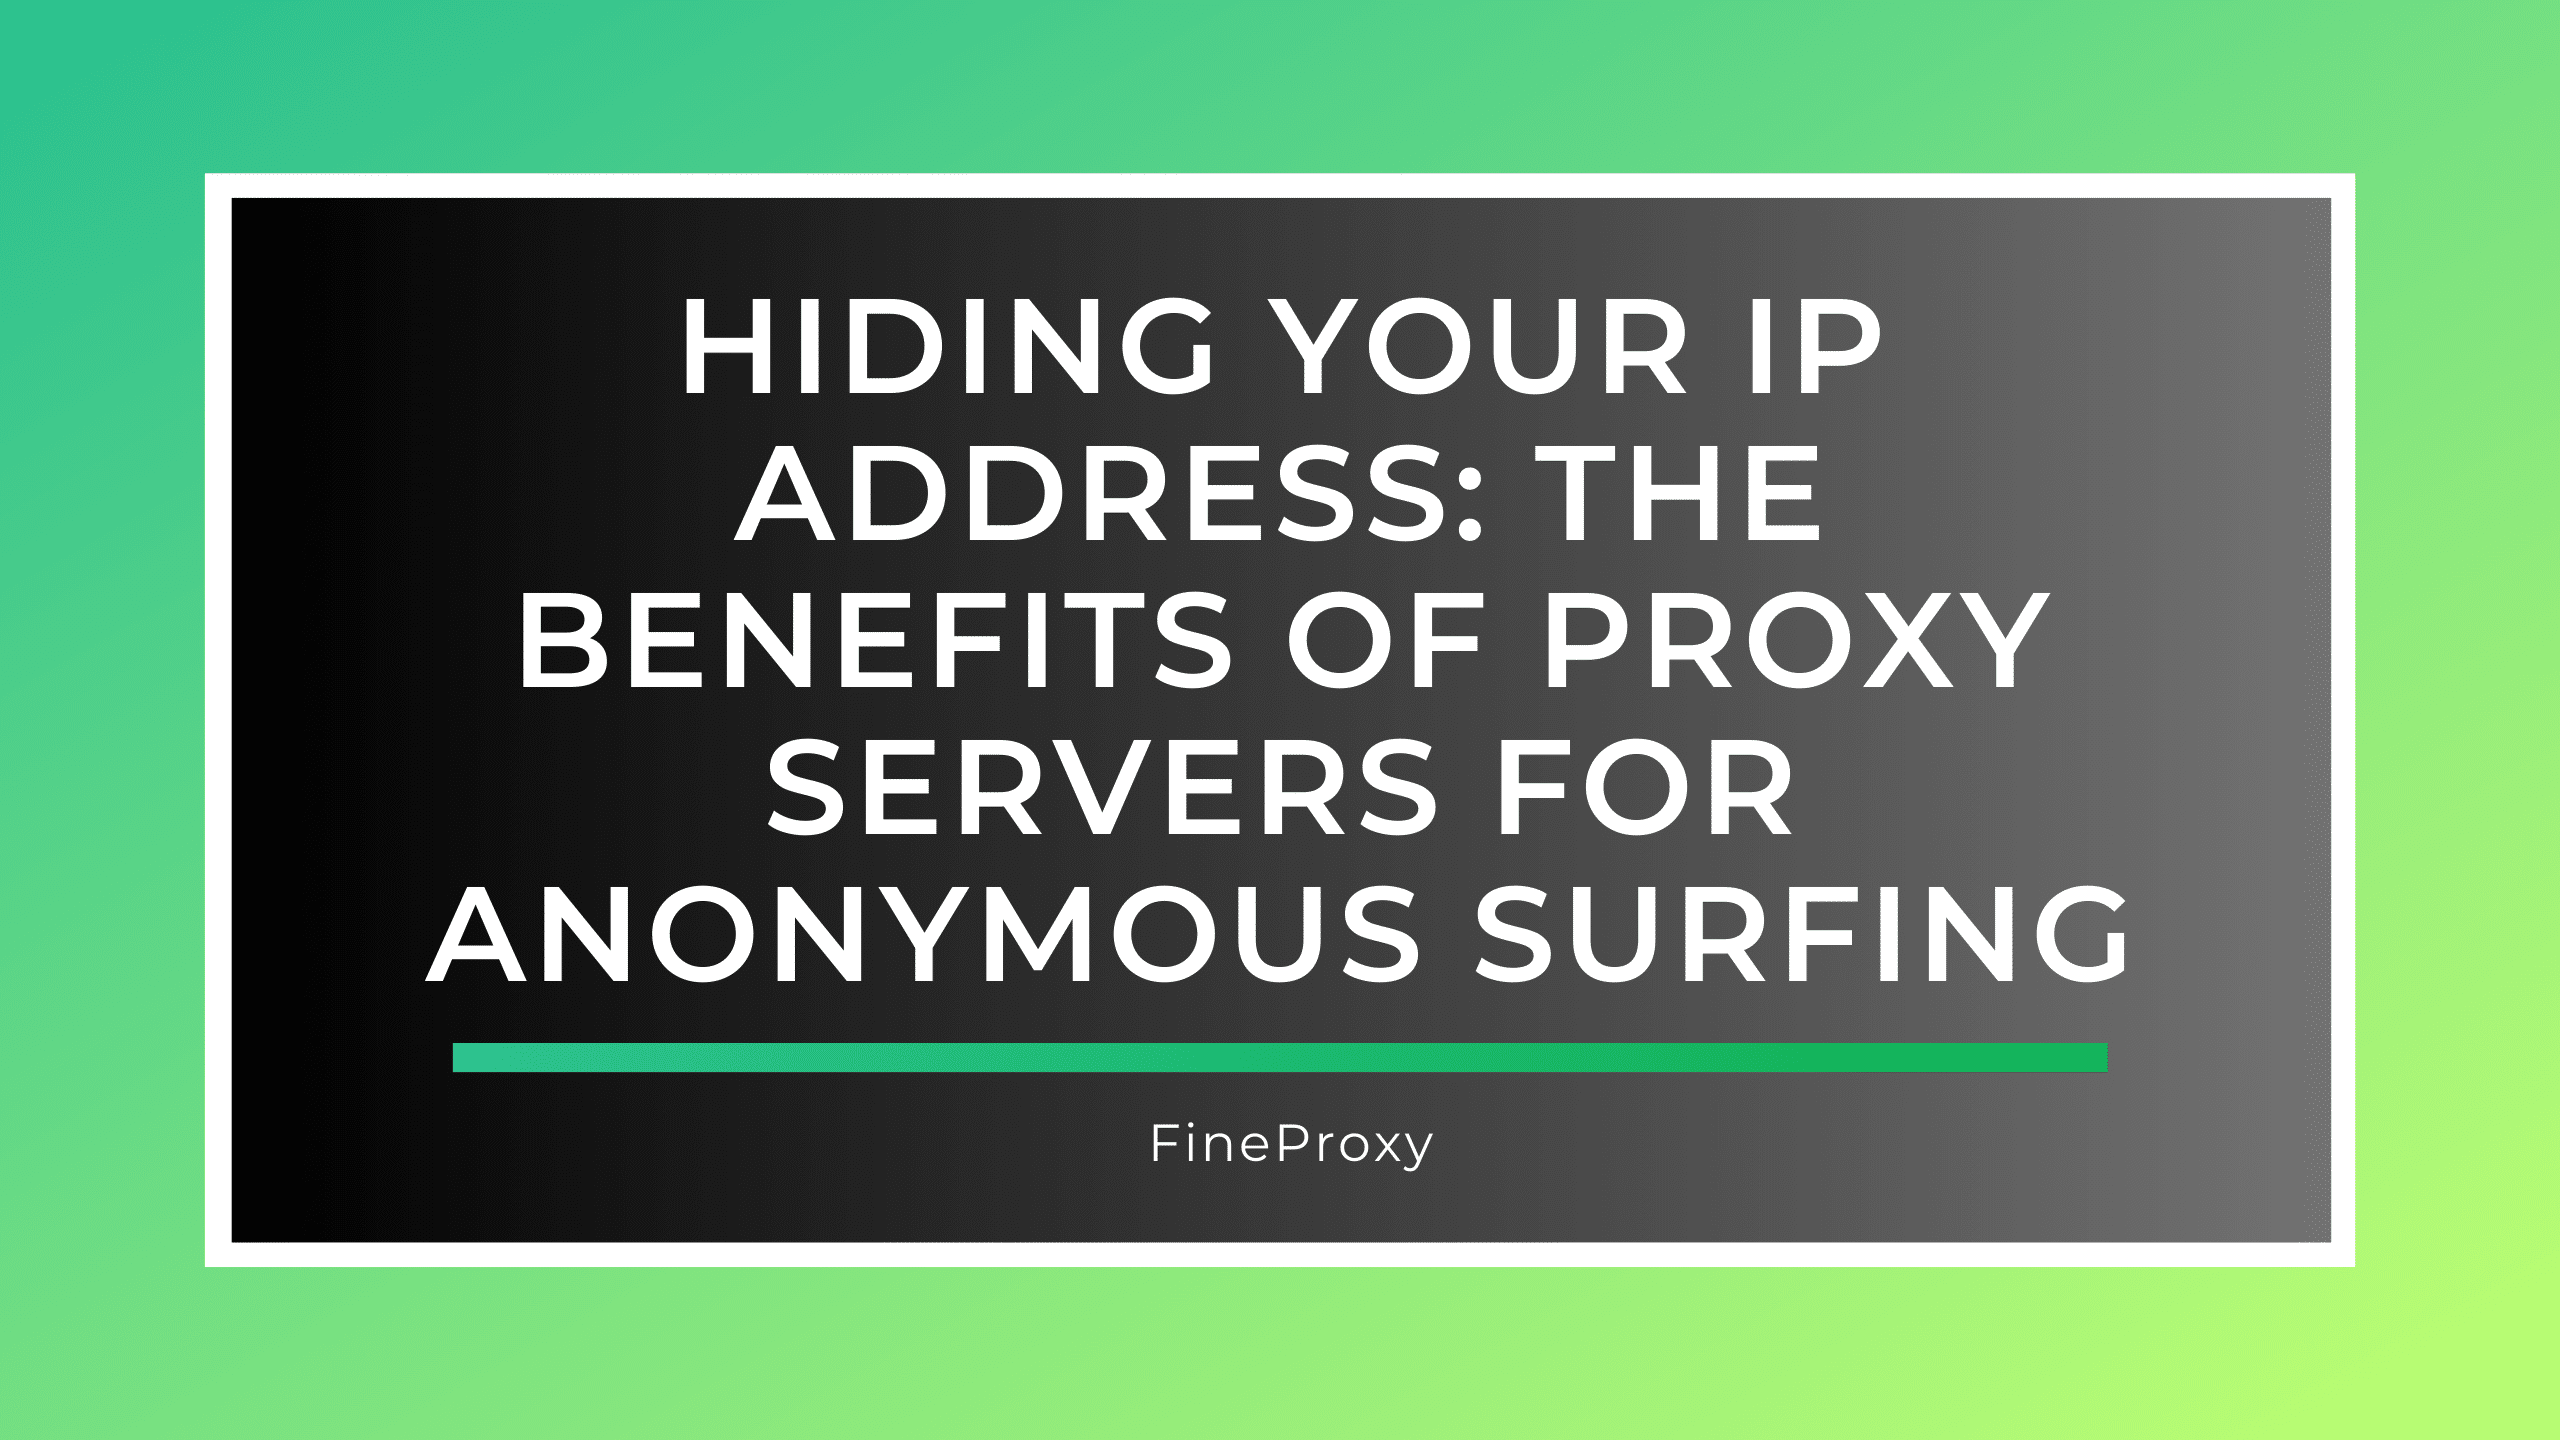 Hiding Your IP Address: The Benefits of Proxy Servers for Anonymous Surfing